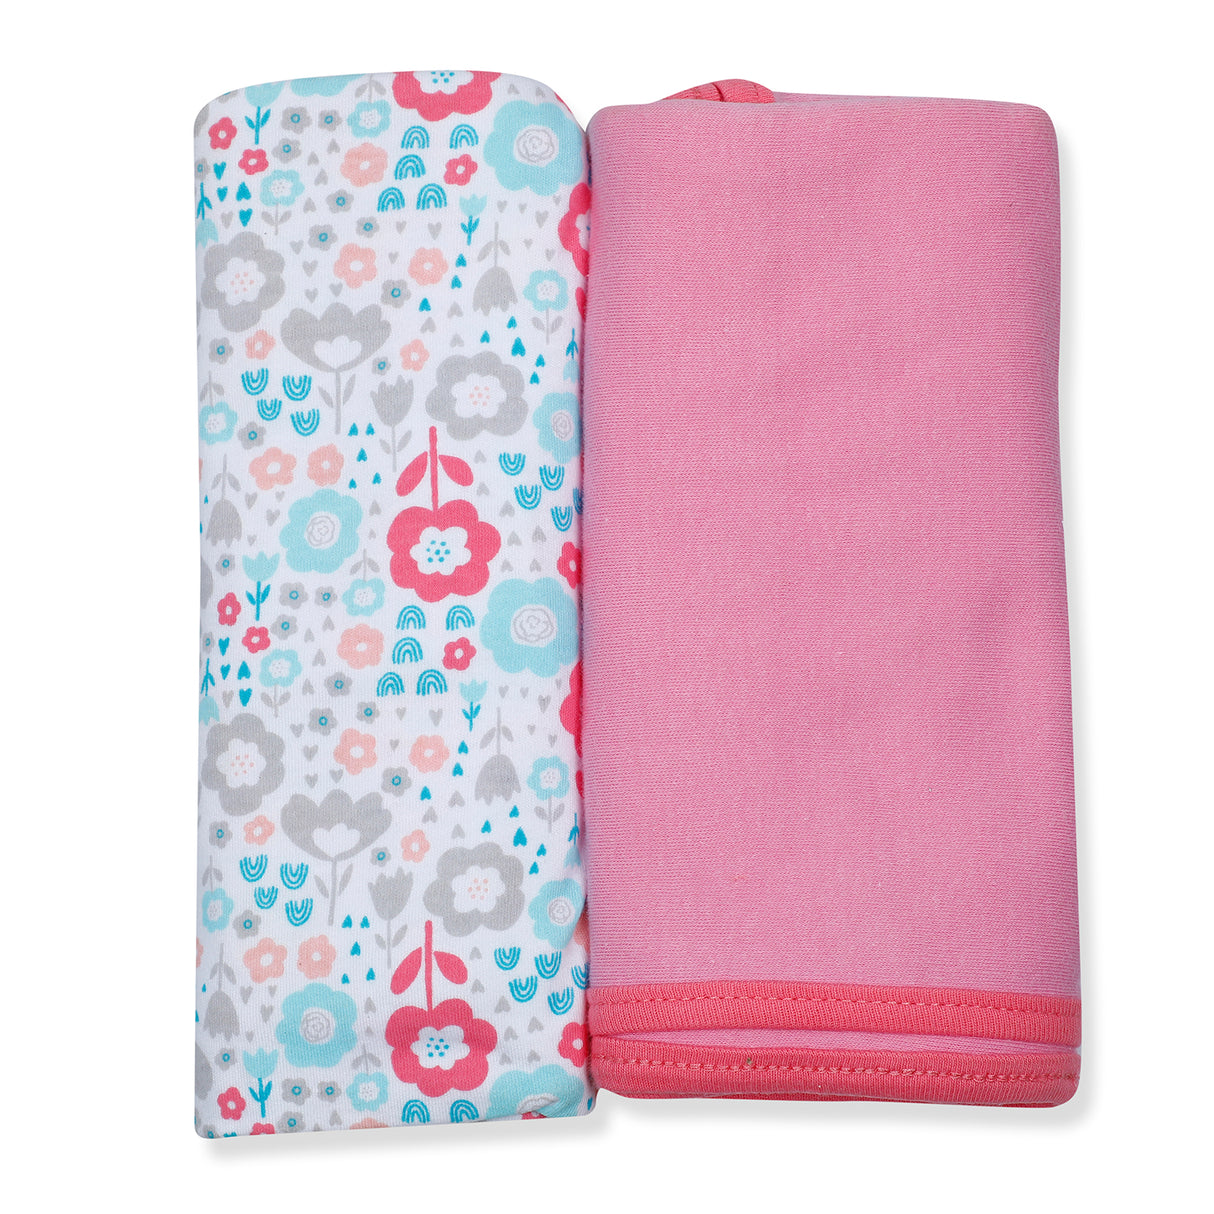 Warm And Gentle Pack Of 2 Cotton Wrapper